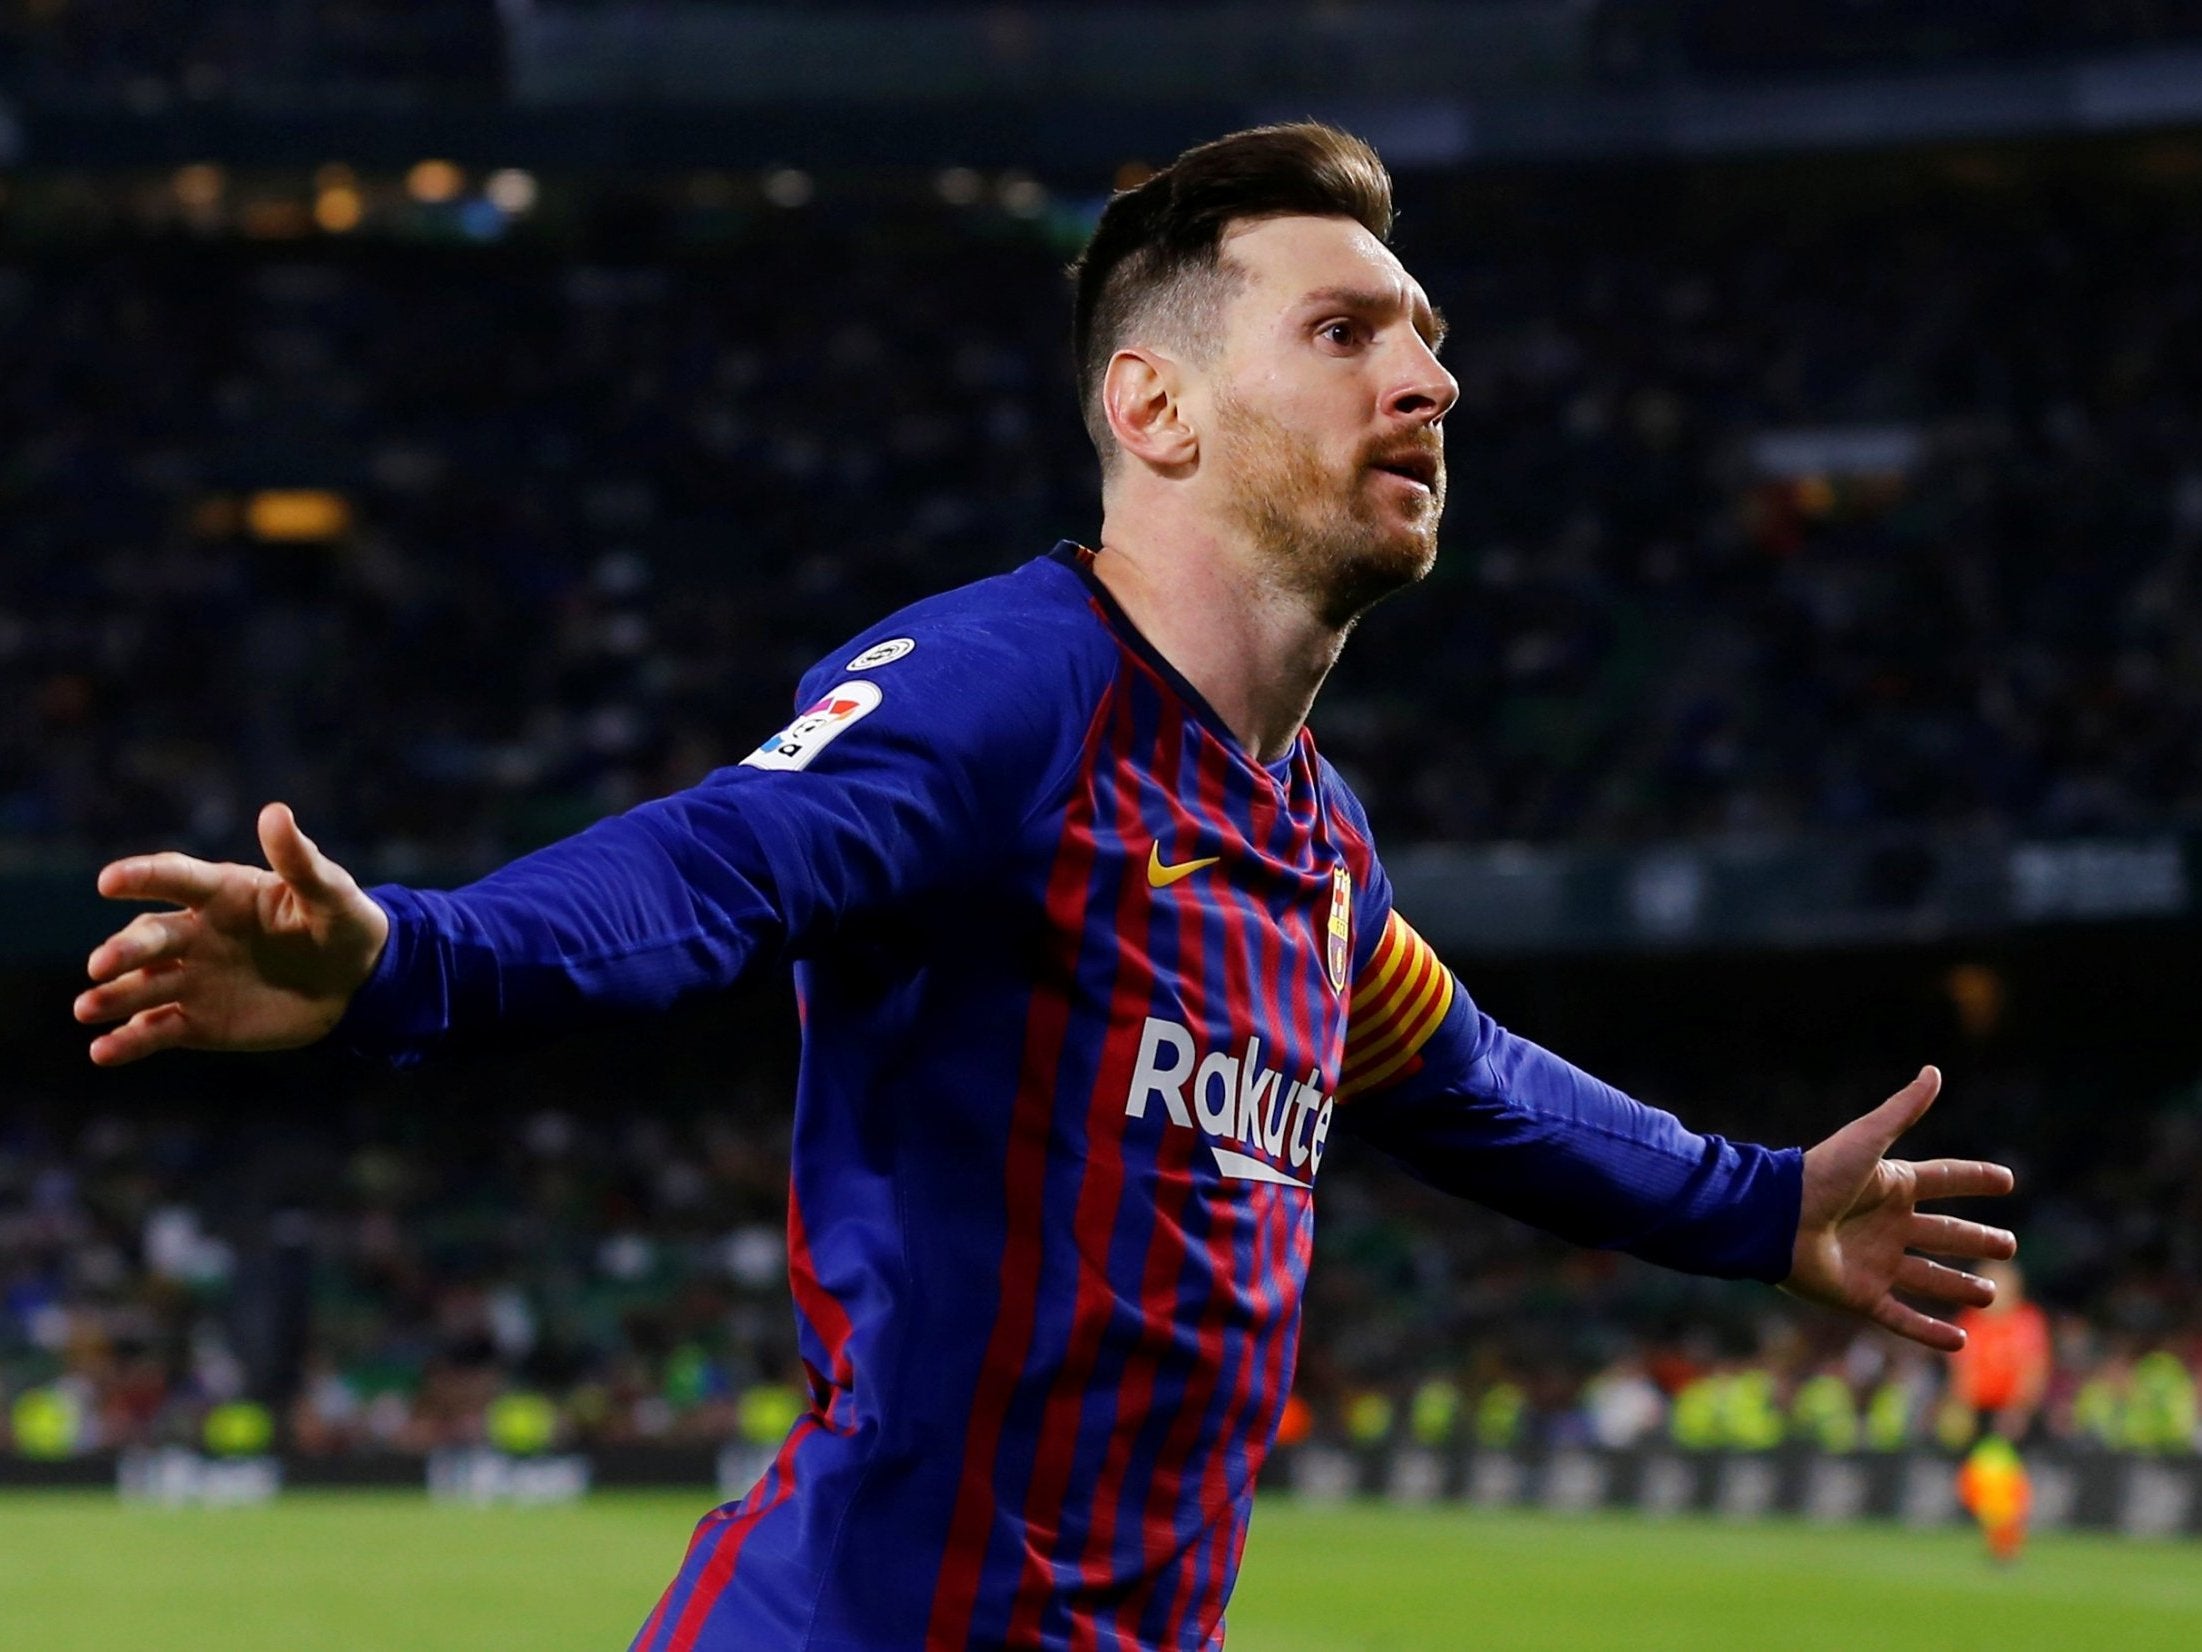 Lionel Messi scored the 51st hat-trick of his career as Barcelona beat Real Betis 4-1